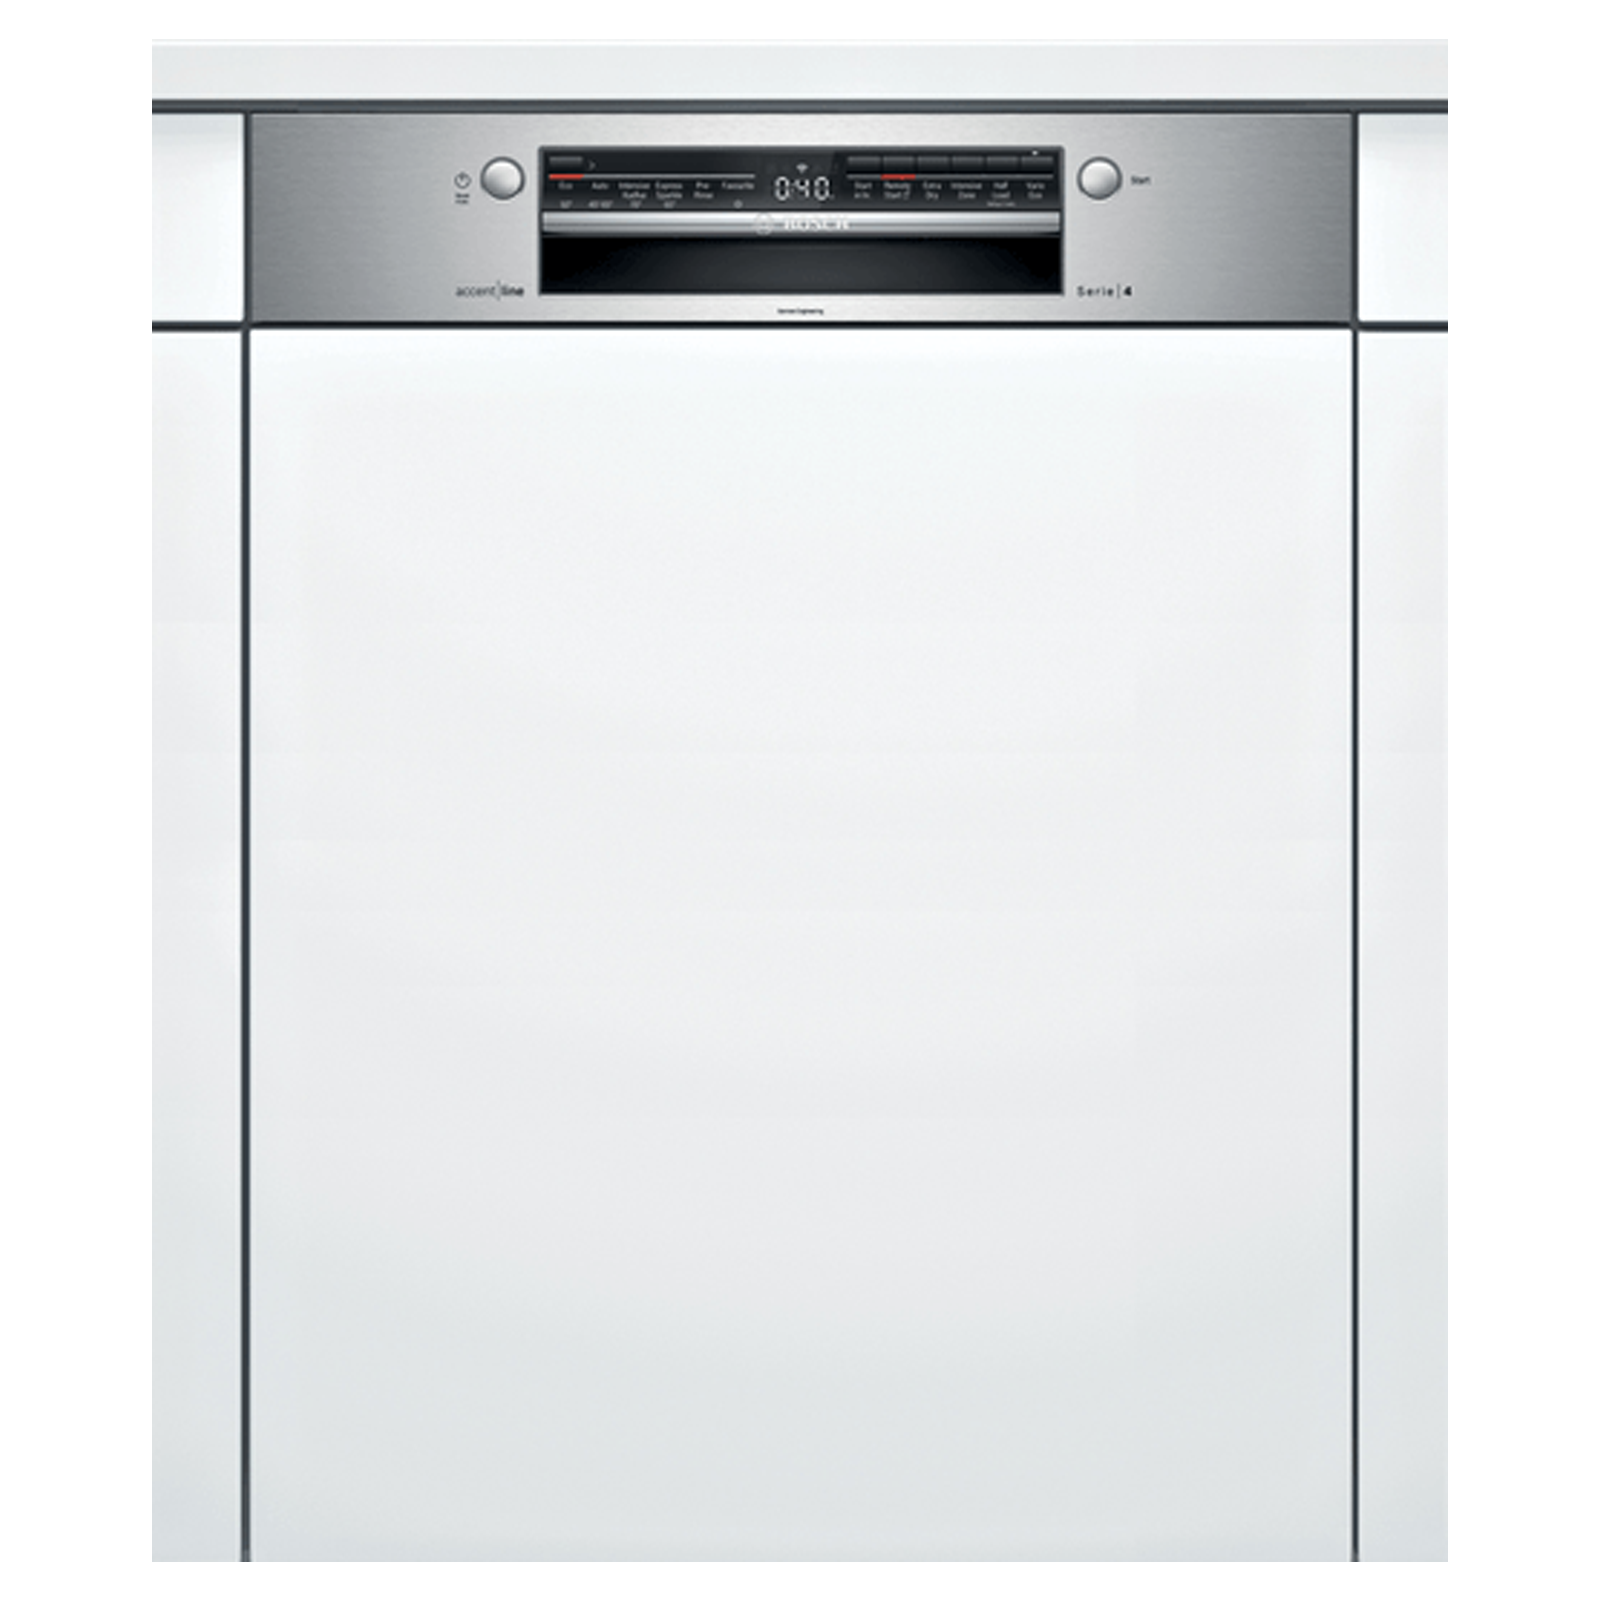 Bosch Serie 4 13 Place Setting Built-in Dishwasher (IOT Enabled, SMI4IVS00I, Stainless Steel)_1